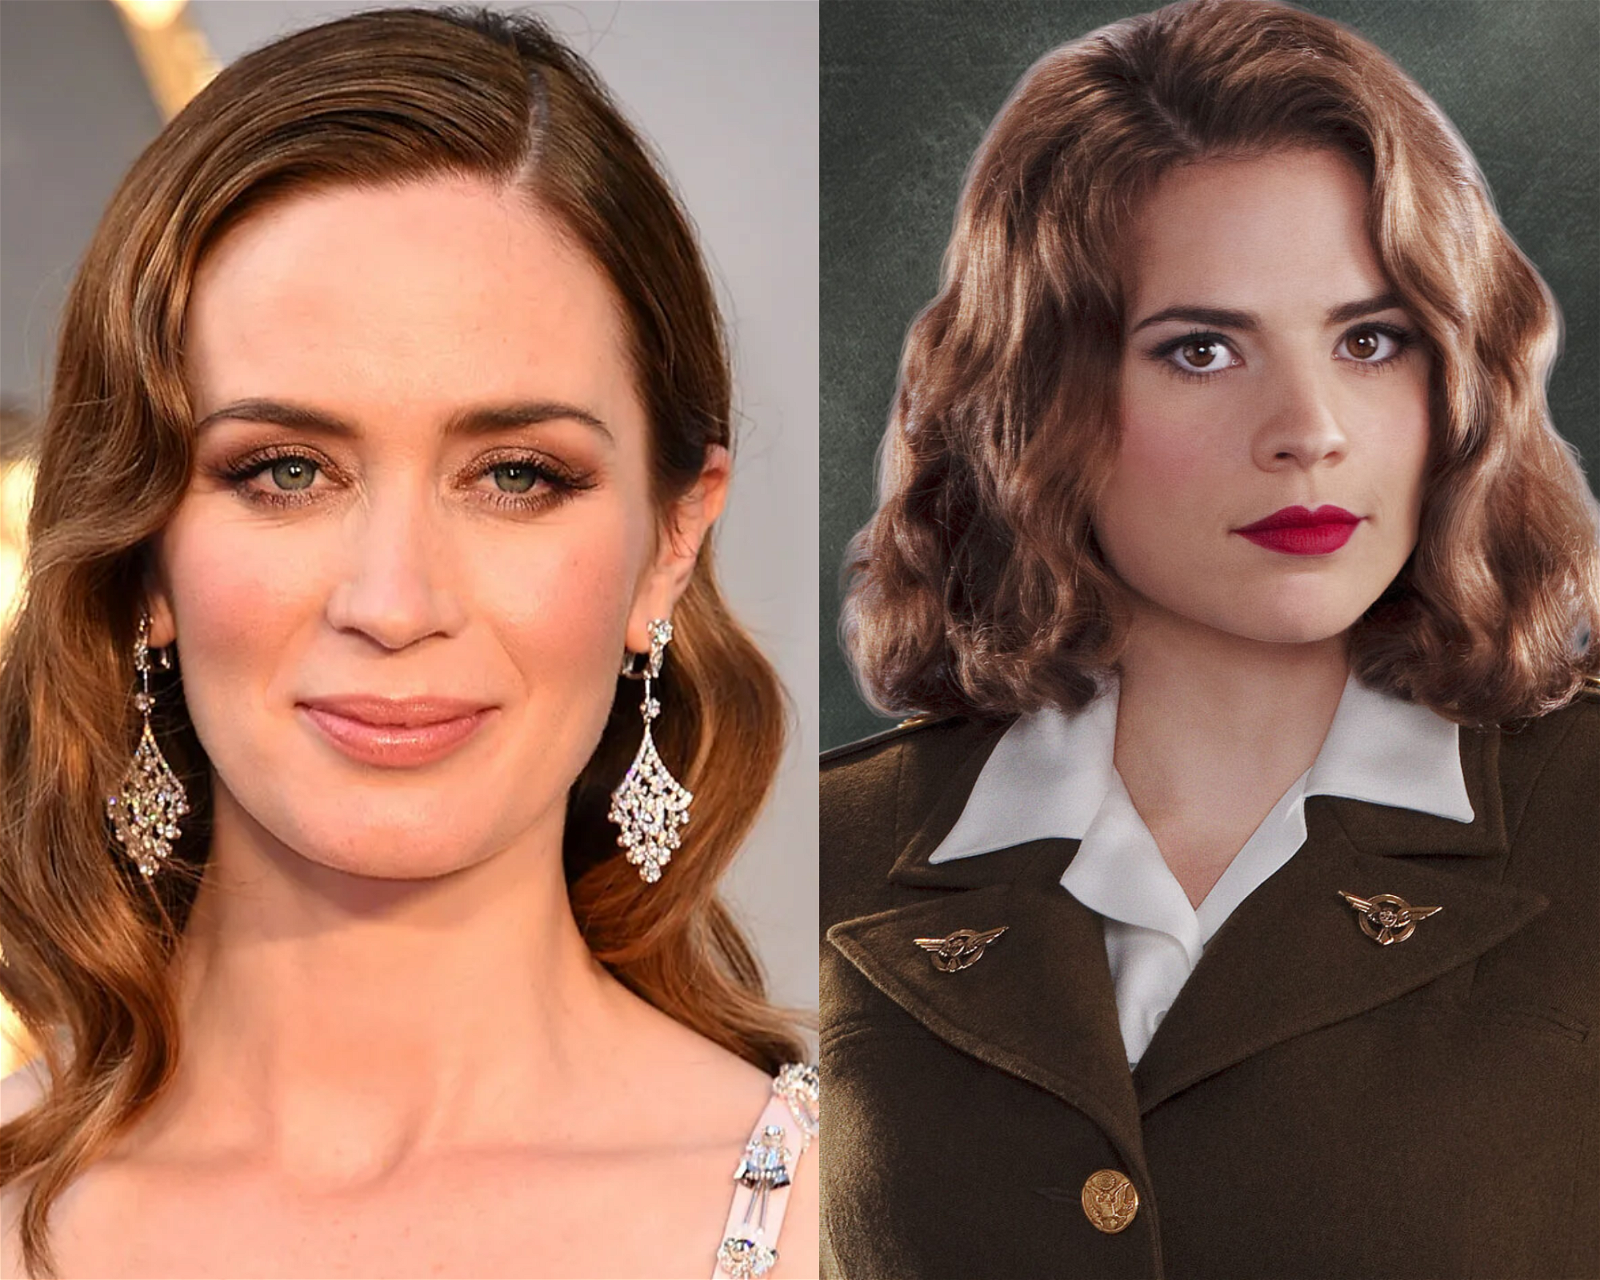 Blunt also rejected the role of Peggy Carter